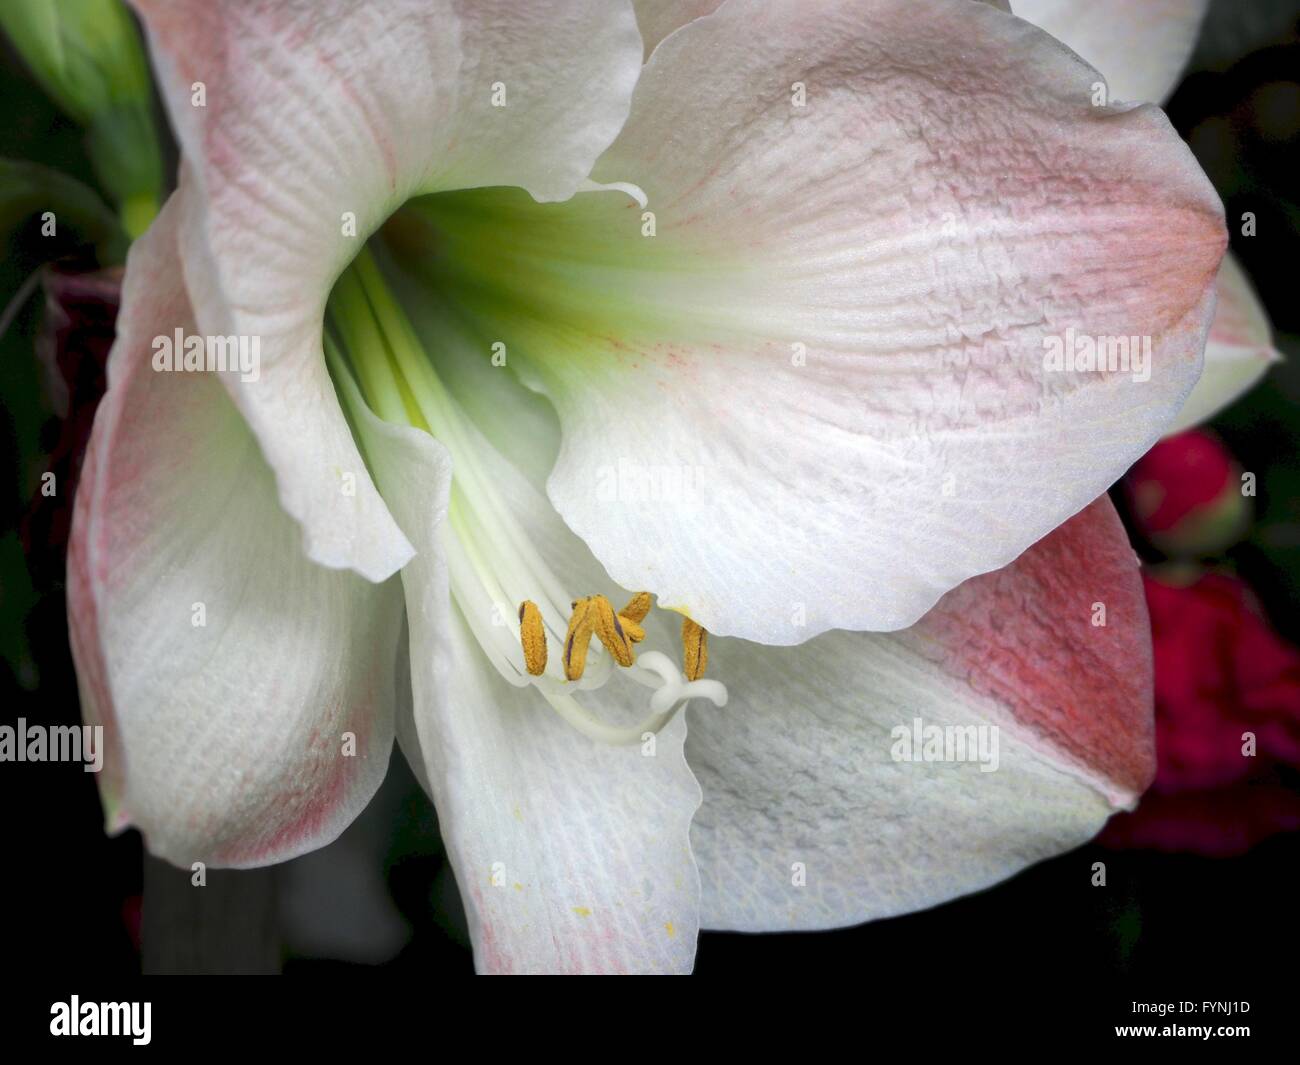 Yellow stamens on white lily flower Stock Photo